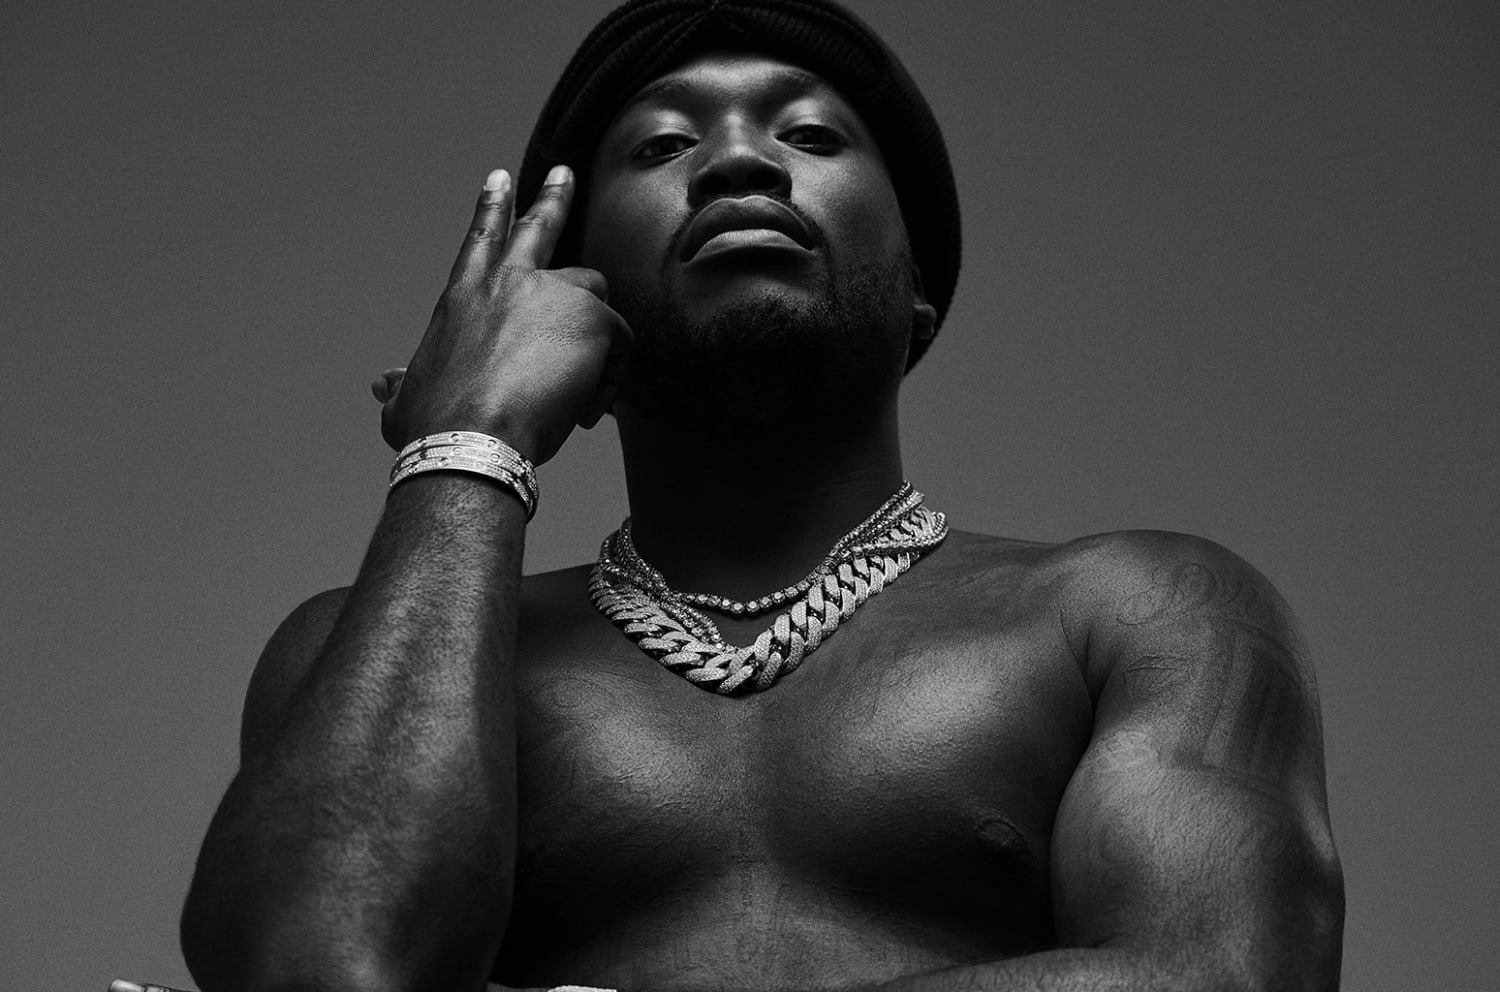 Meek Mill's 'Going Bad' and 'What's Free' Debut in Top 10 of Hot R&B/Hip-Hop Songs Chart